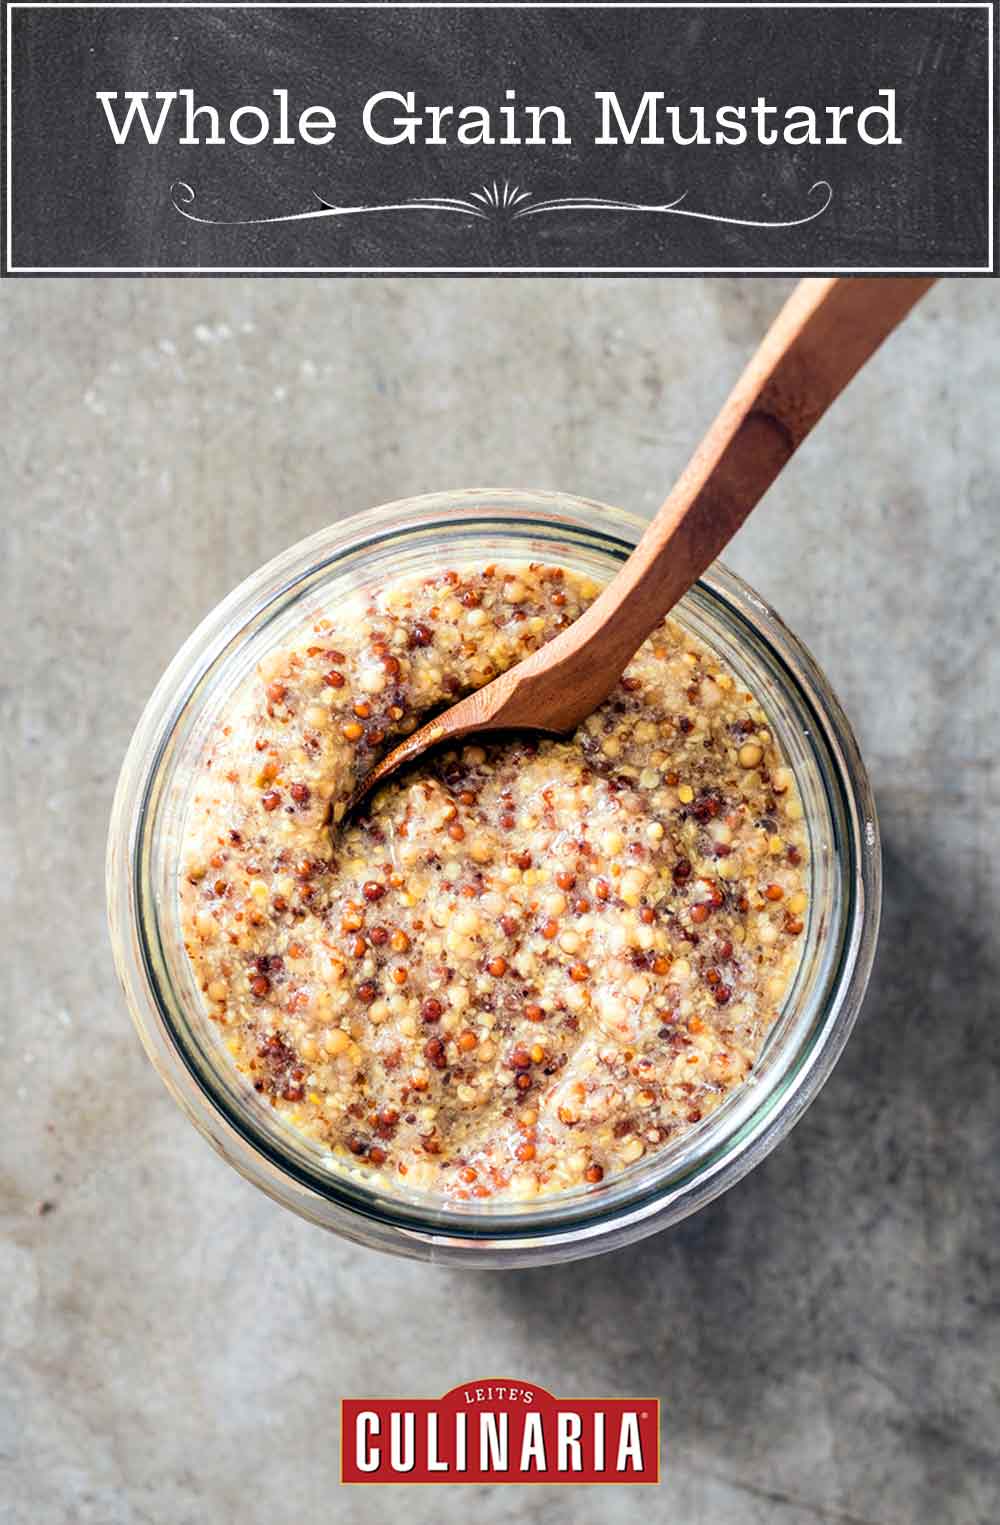 A jar of whole grain mustard with a wooden spoon in it.